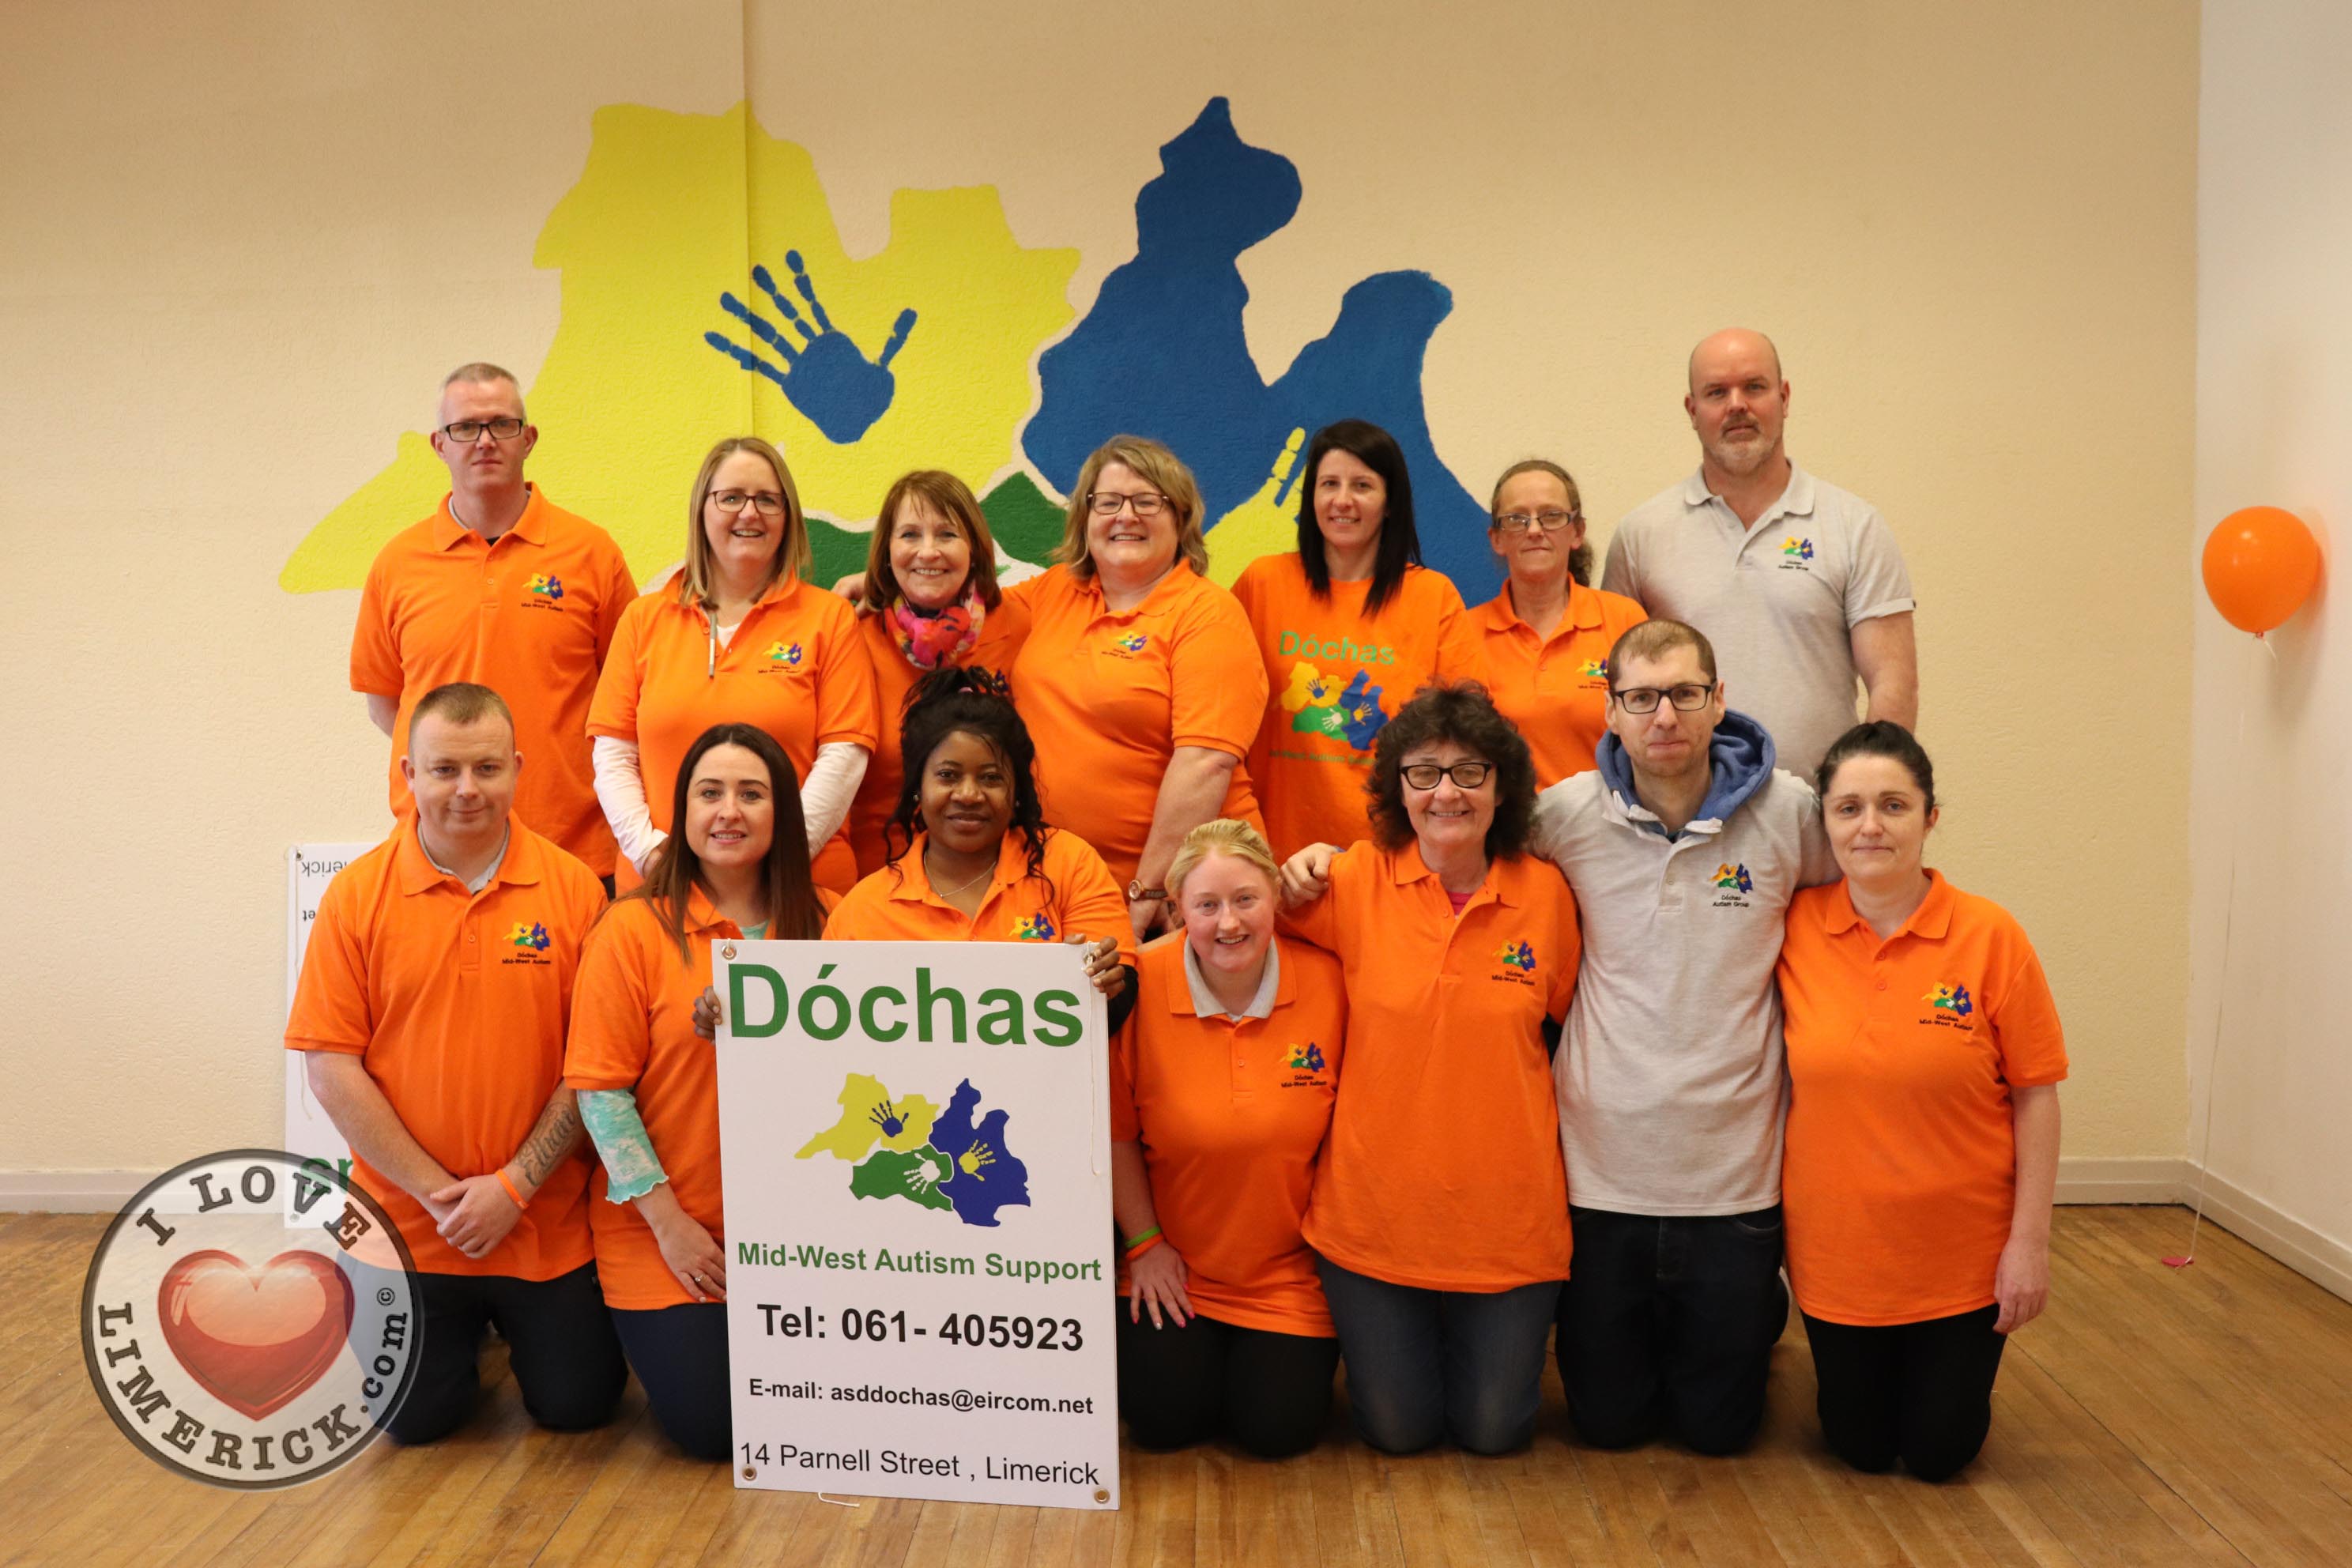 Dochas MidWest Autism